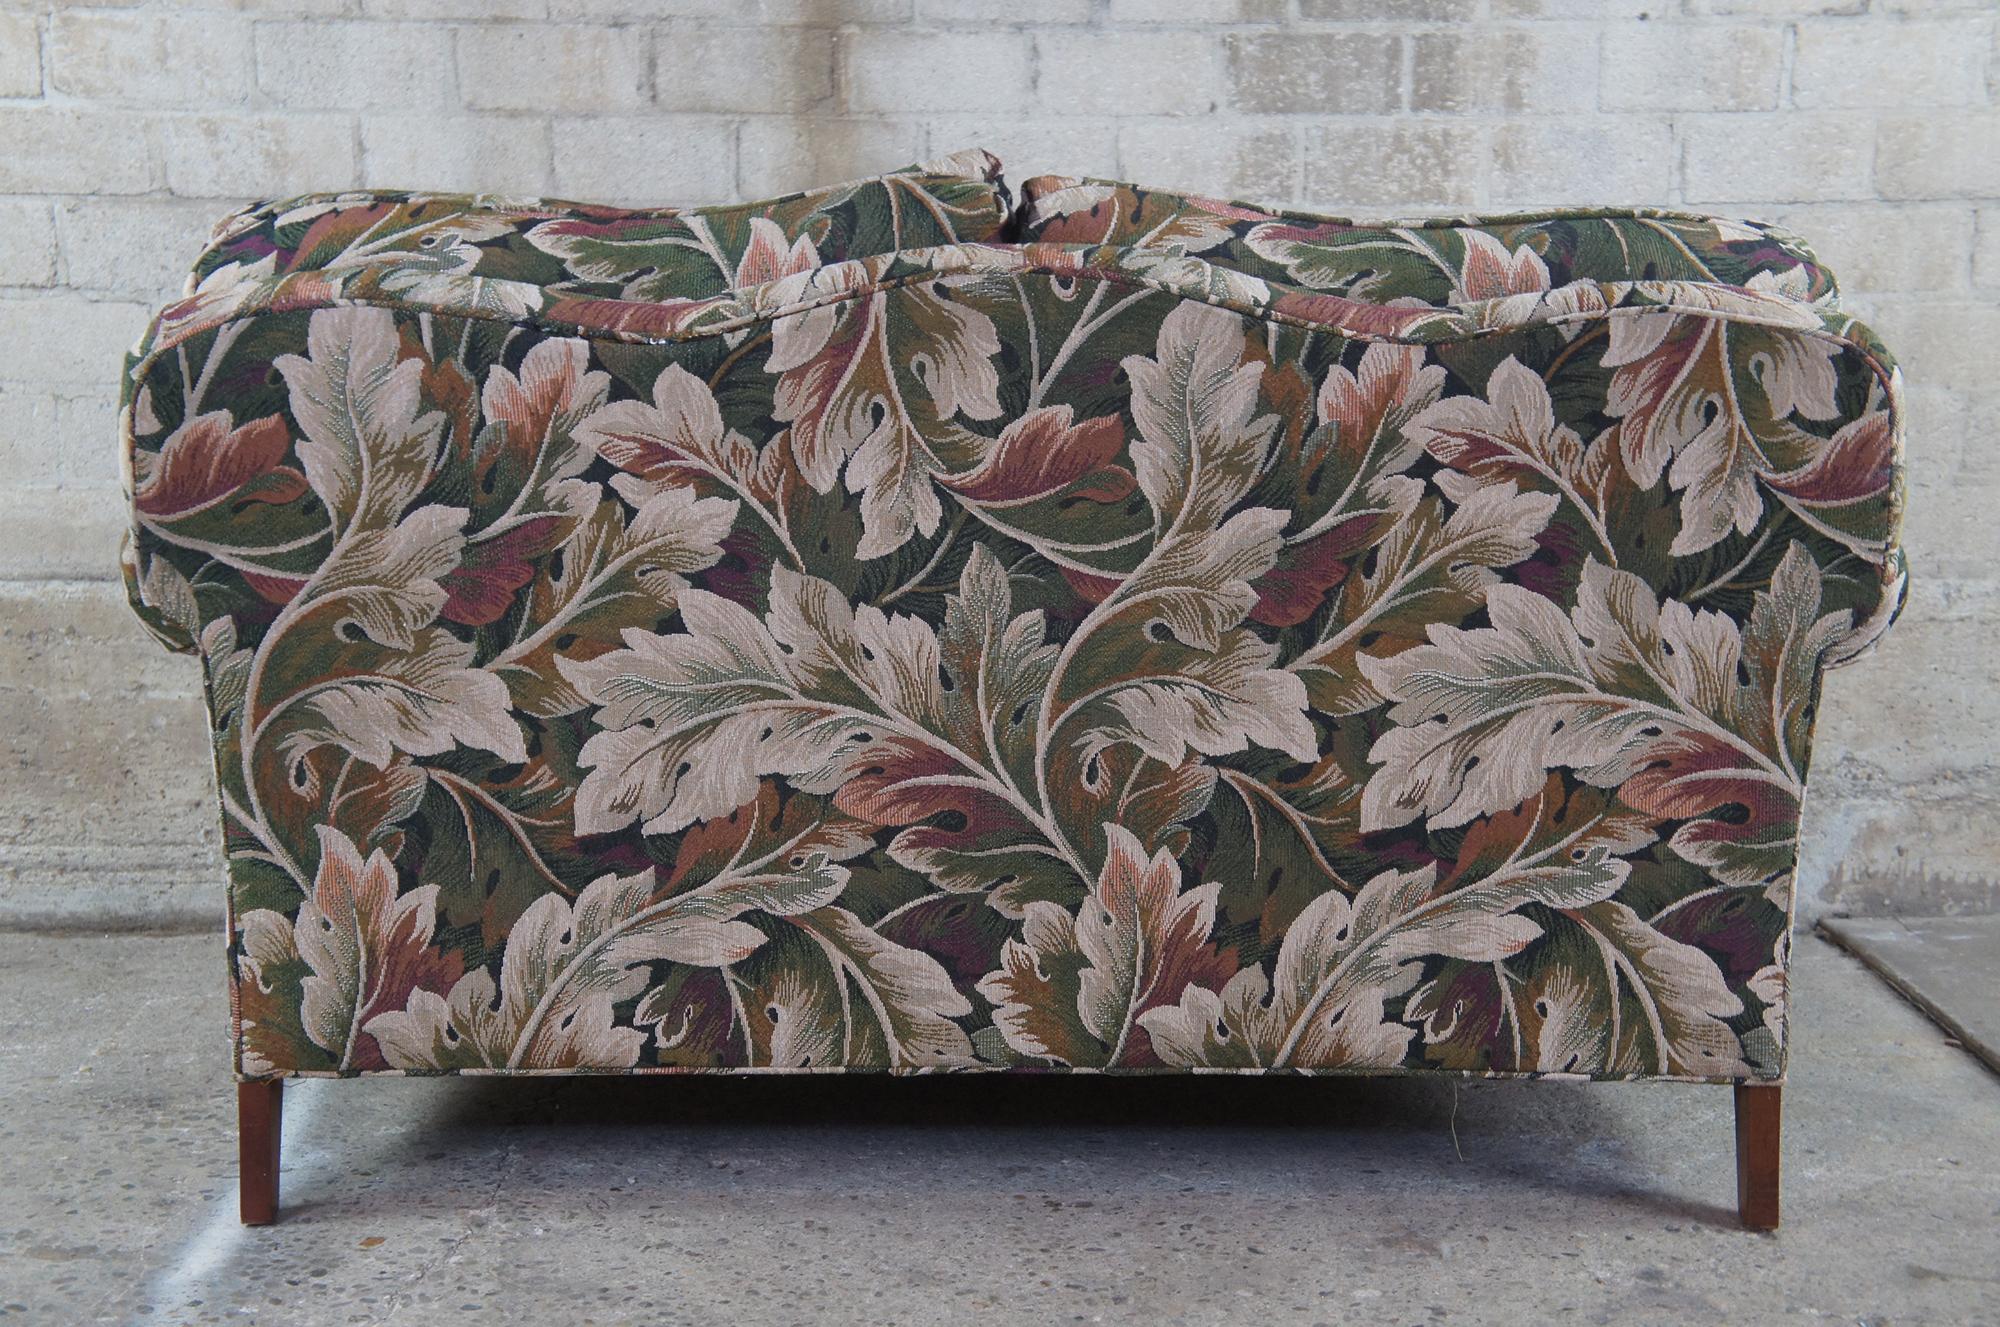 20th Century 2 Vintage Pearson Furniture Camelback Loveseats Settee Sofa Couch Floral Pair